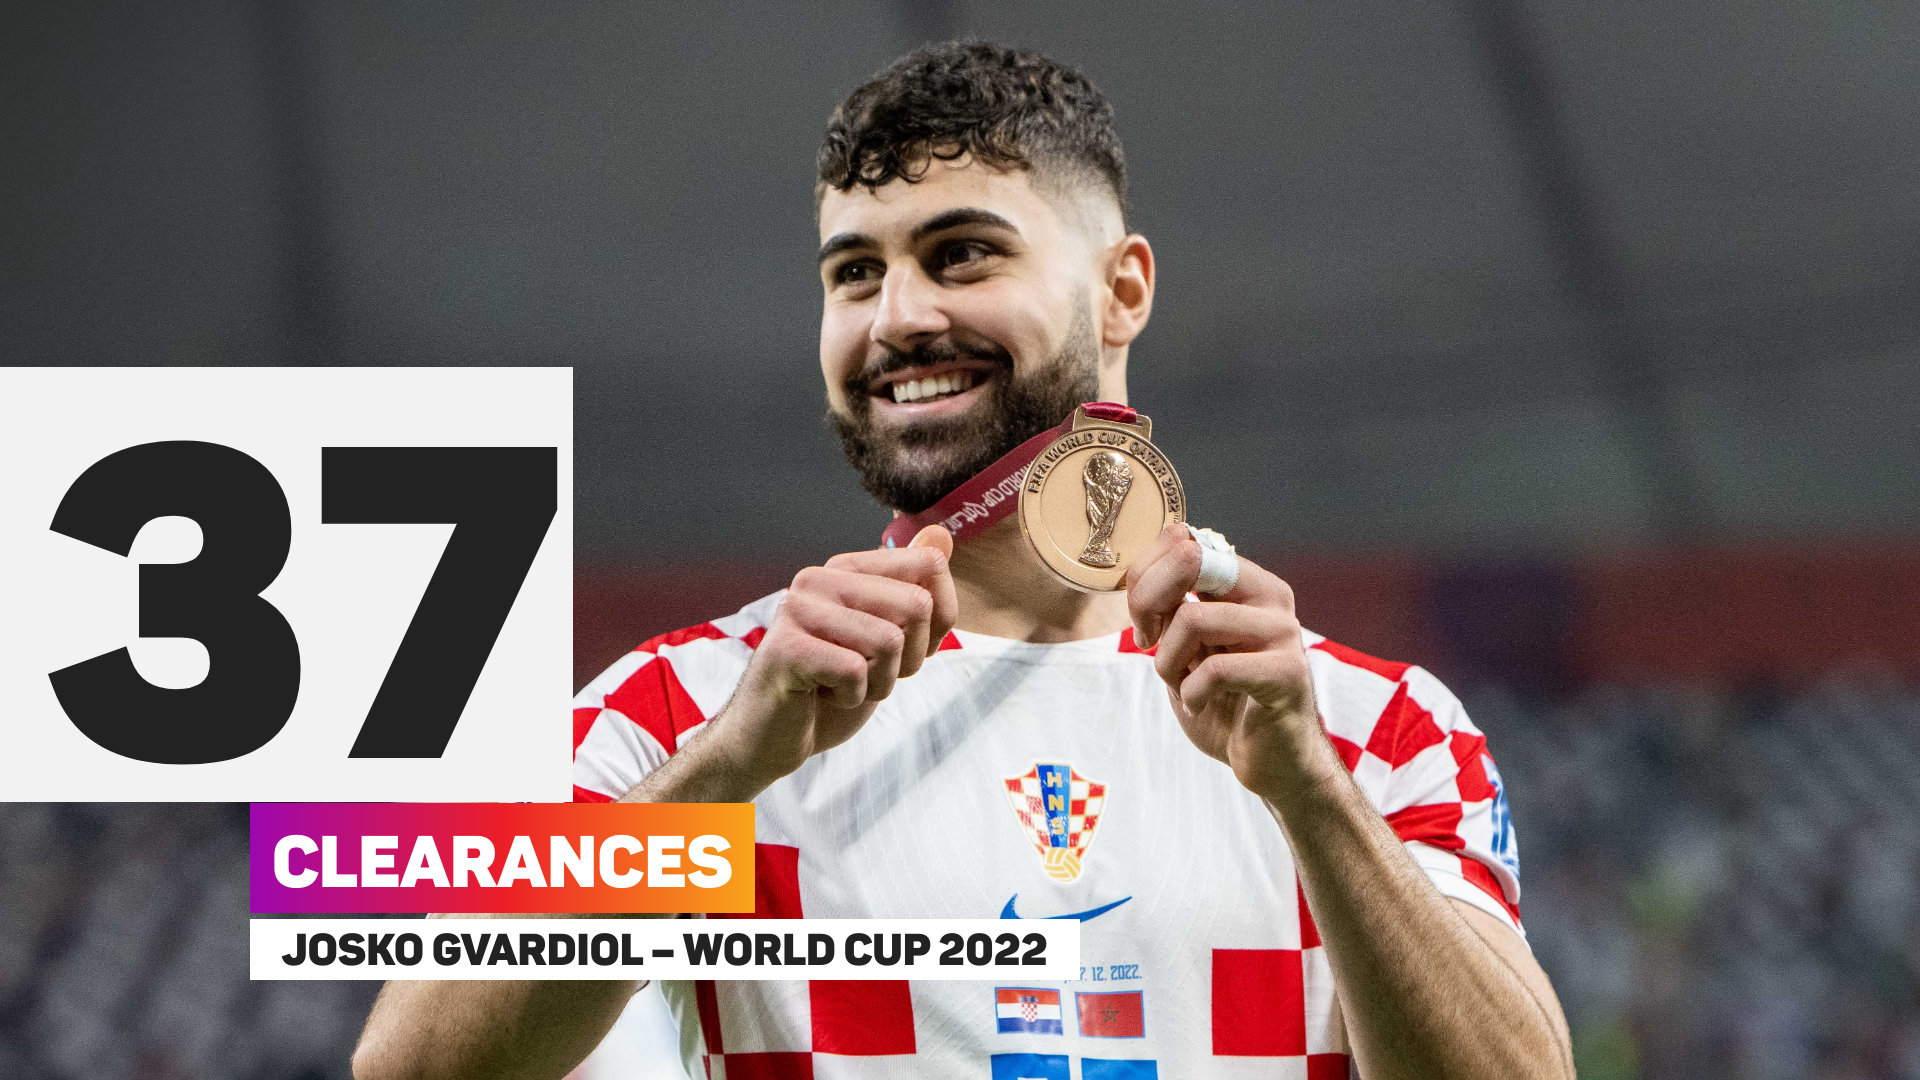 Josko Gvardiol made 37 clearances at the World Cup